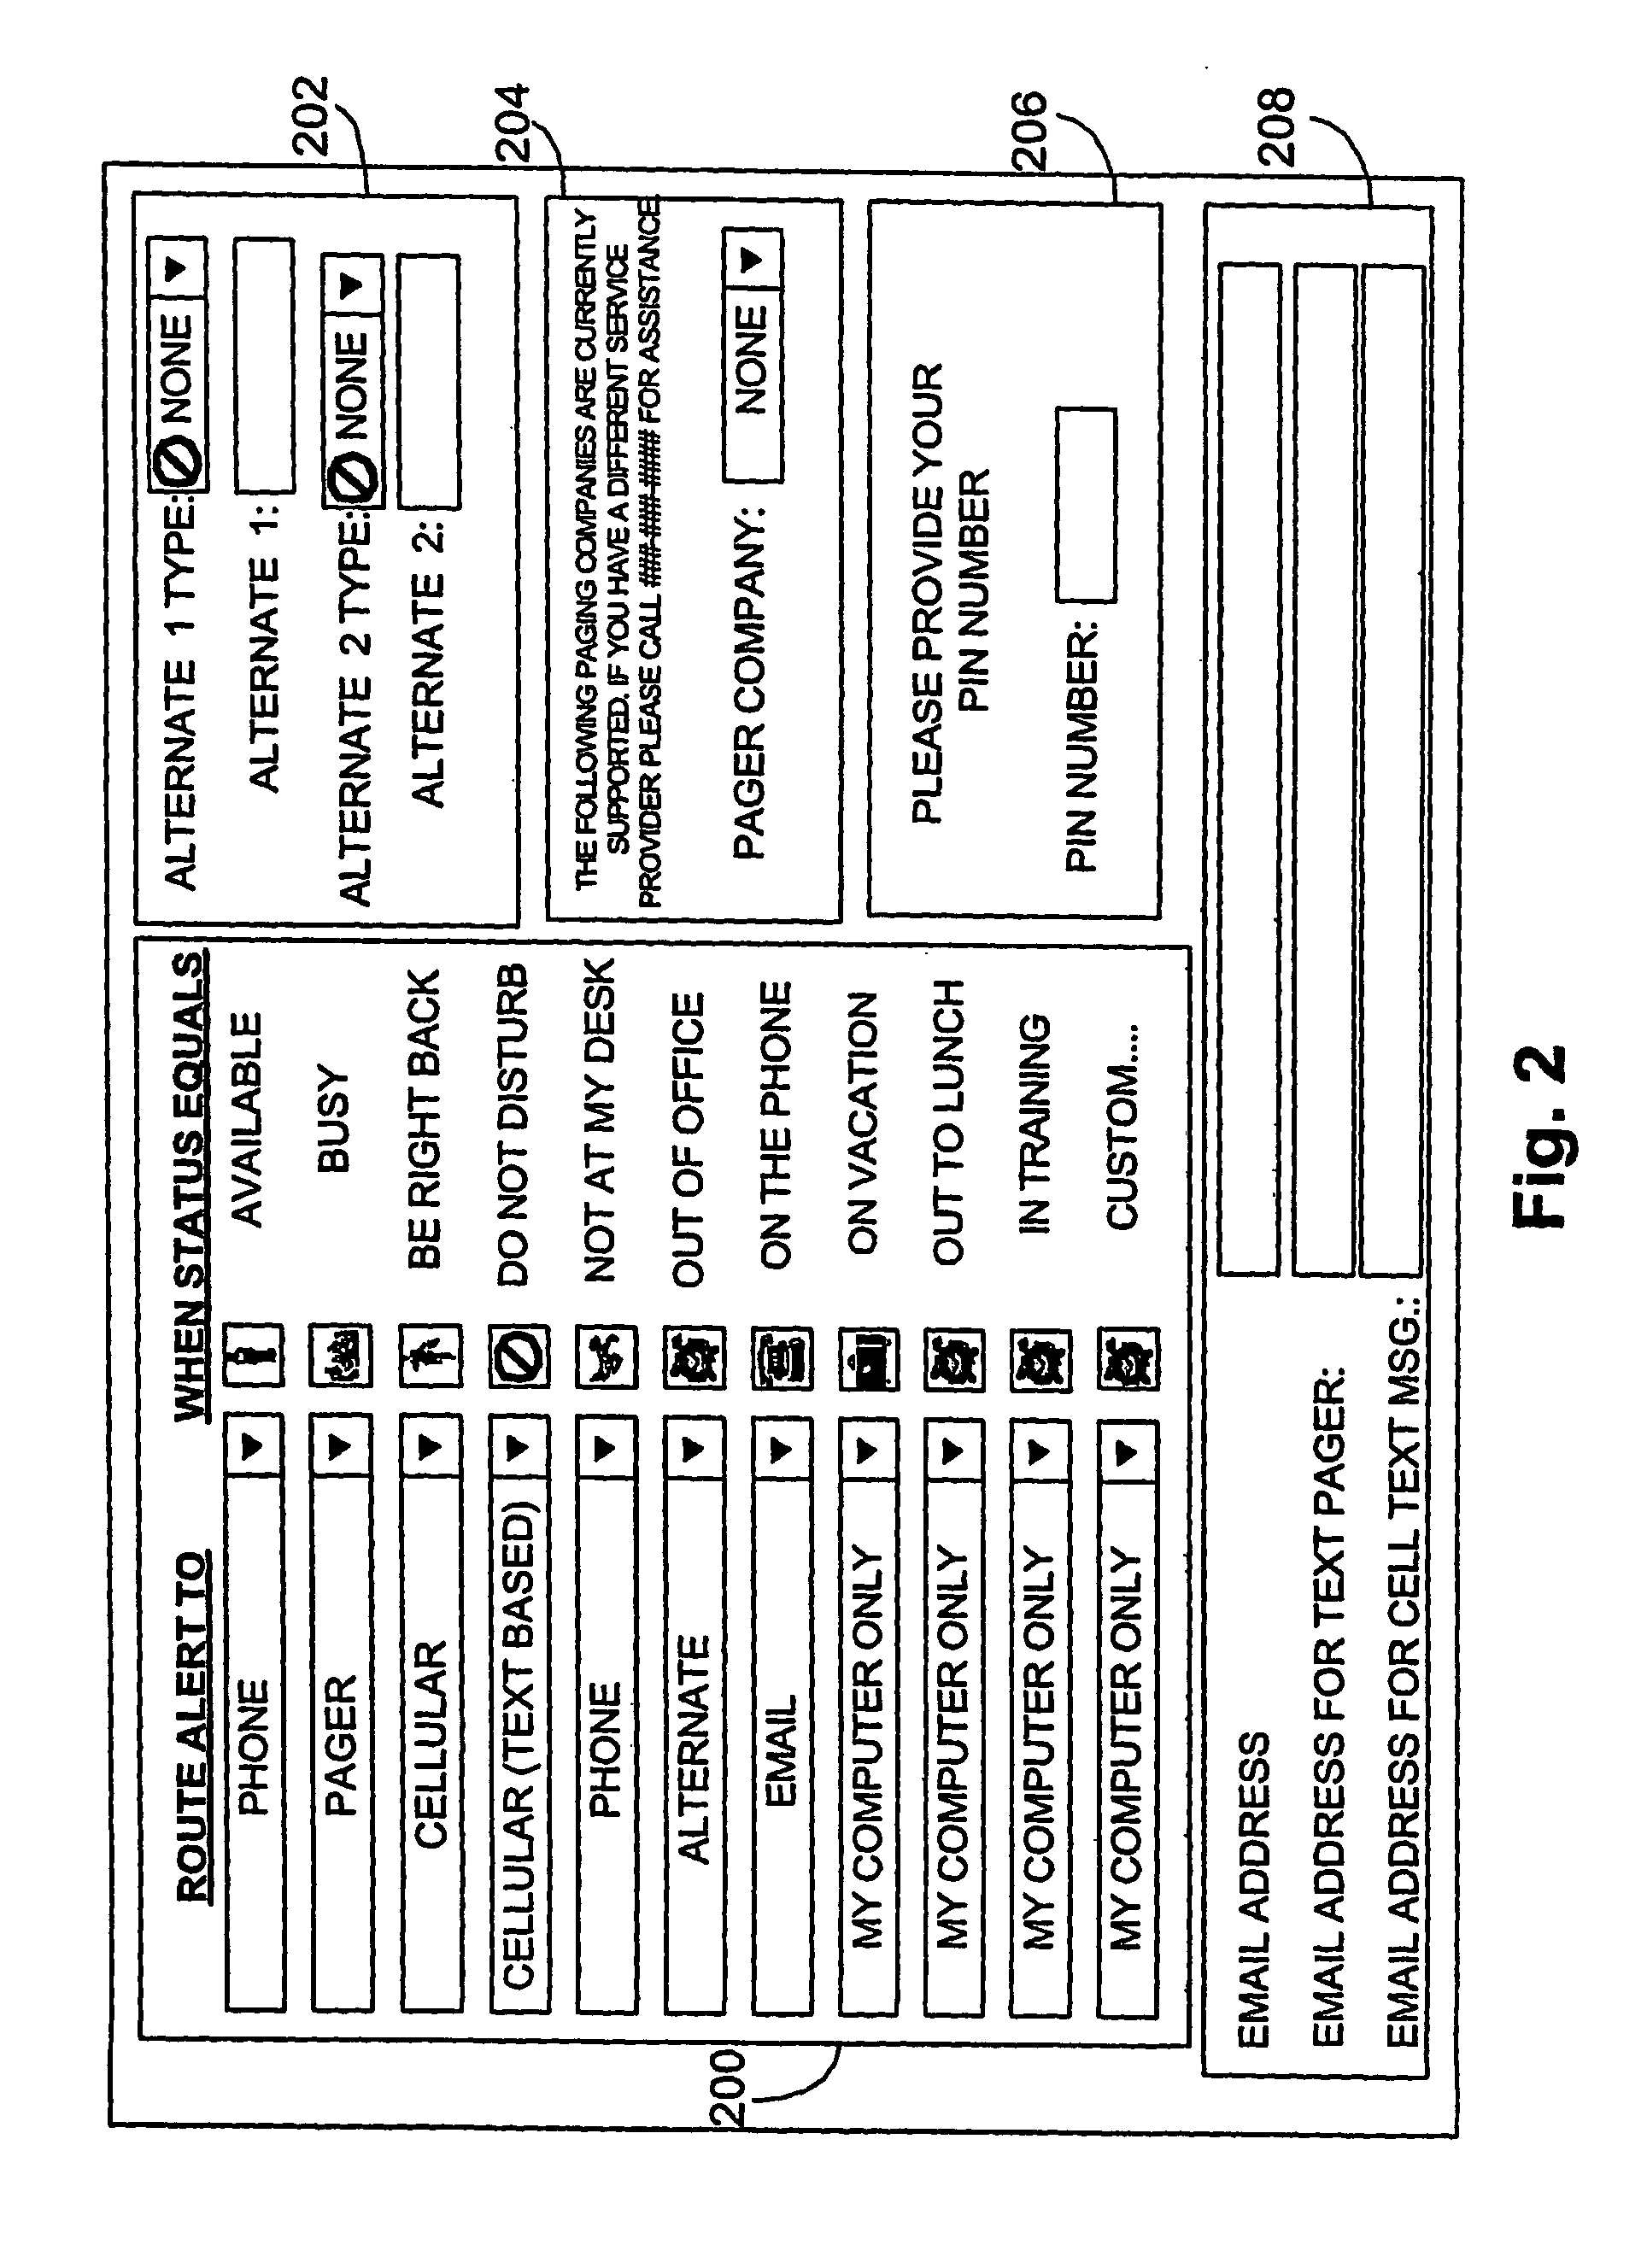 Method and apparatus for remote alarm data delivery